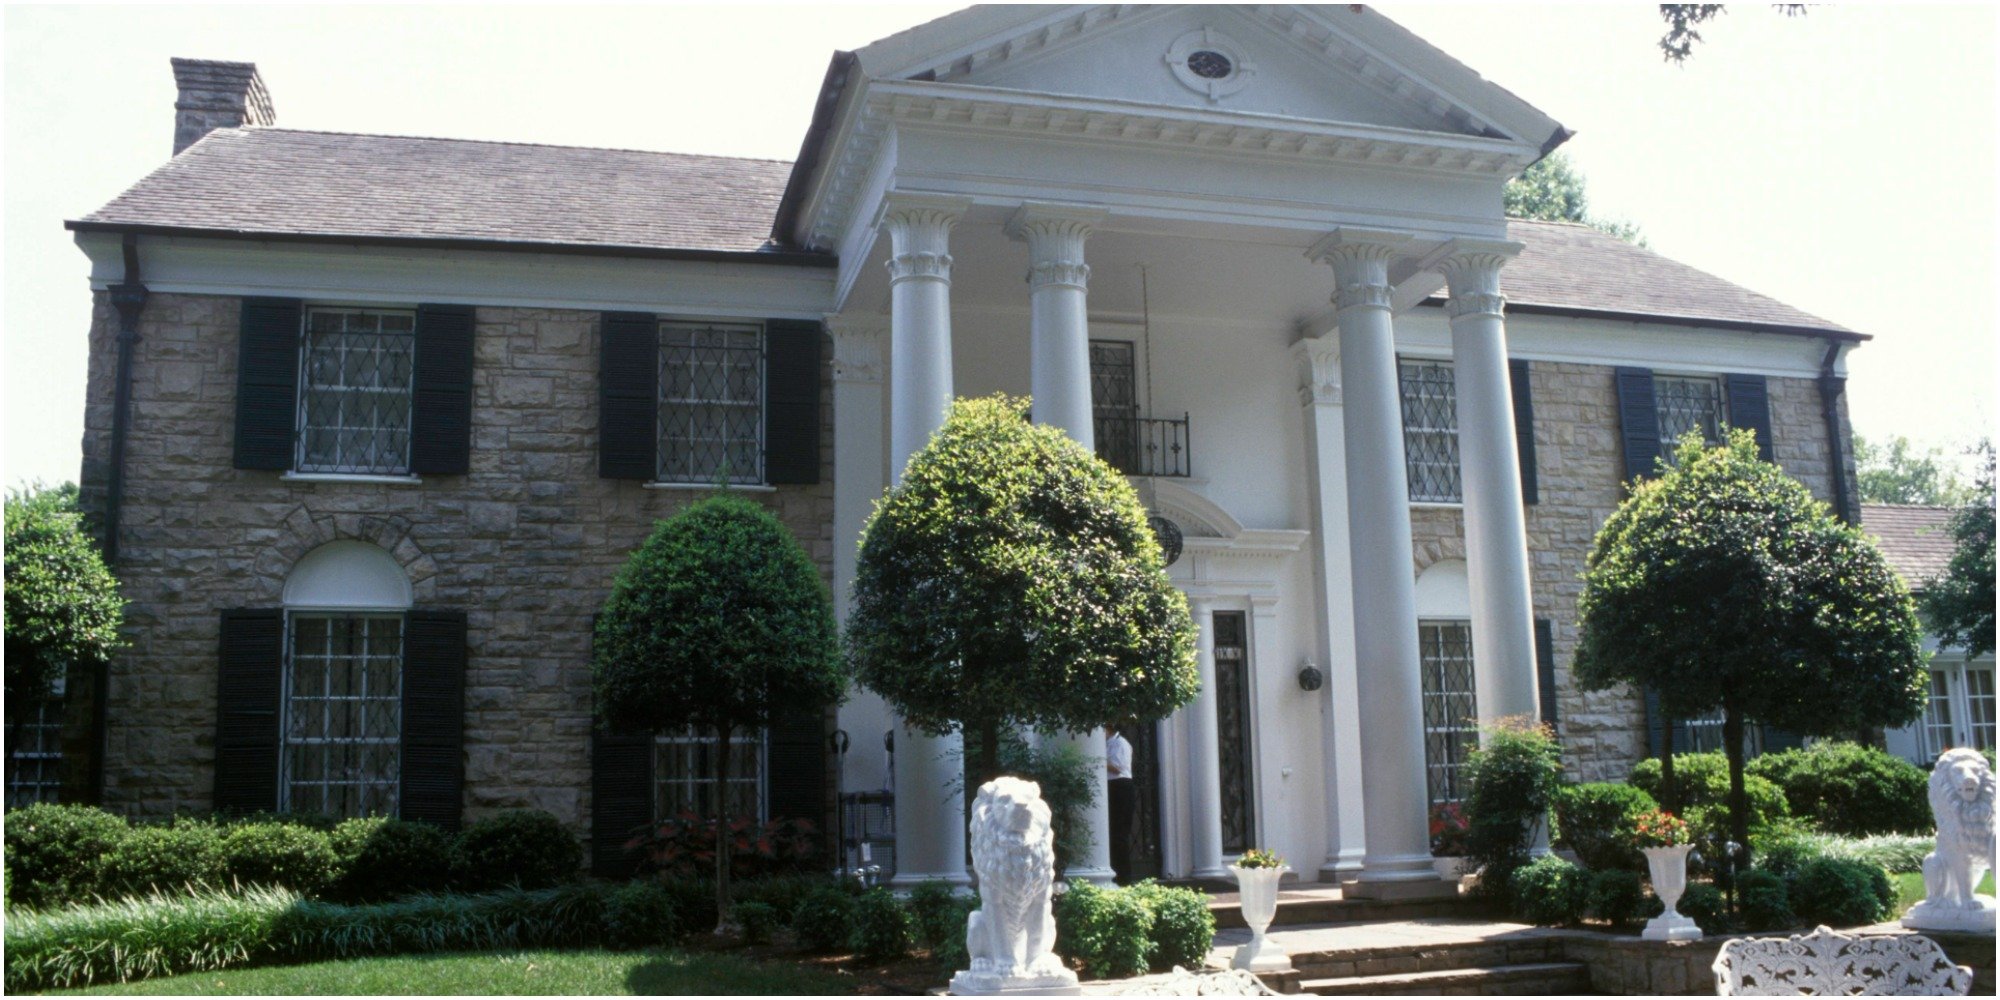 The Graceland Estate in Memphis, Tennessee where Elvis Presley lived and died.